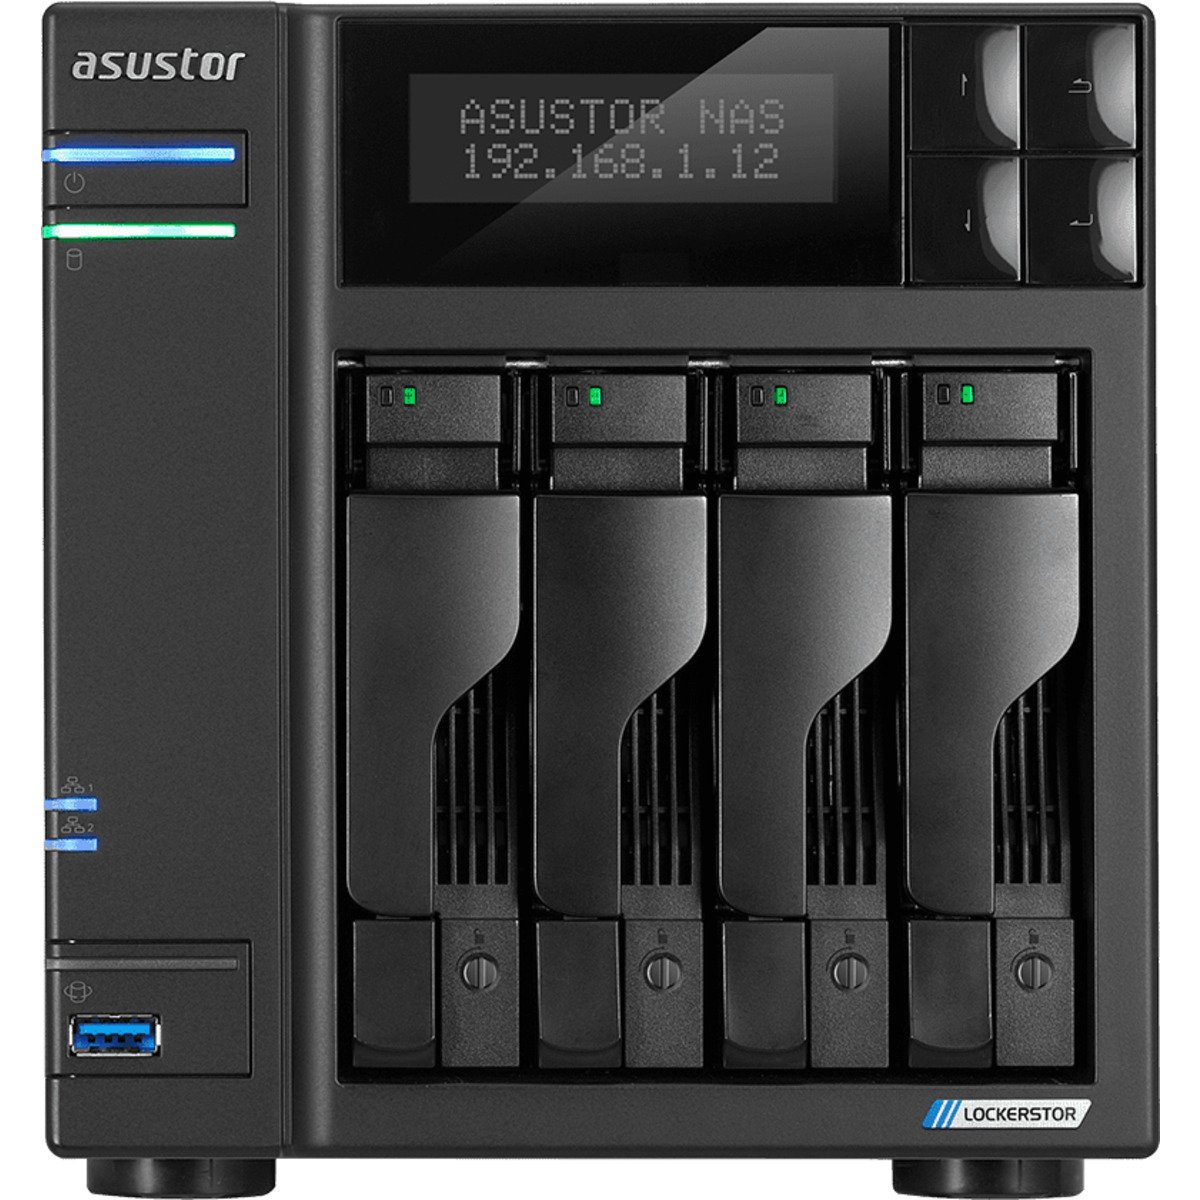 ASUSTOR AS6604T Lockerstor 4 24tb 4-Bay Desktop Multimedia / Power User / Business NAS - Network Attached Storage Device 4x6tb Western Digital Red Plus WD60EFPX 3.5 5640rpm SATA 6Gb/s HDD NAS Class Drives Installed - Burn-In Tested - FREE RAM UPGRADE AS6604T Lockerstor 4